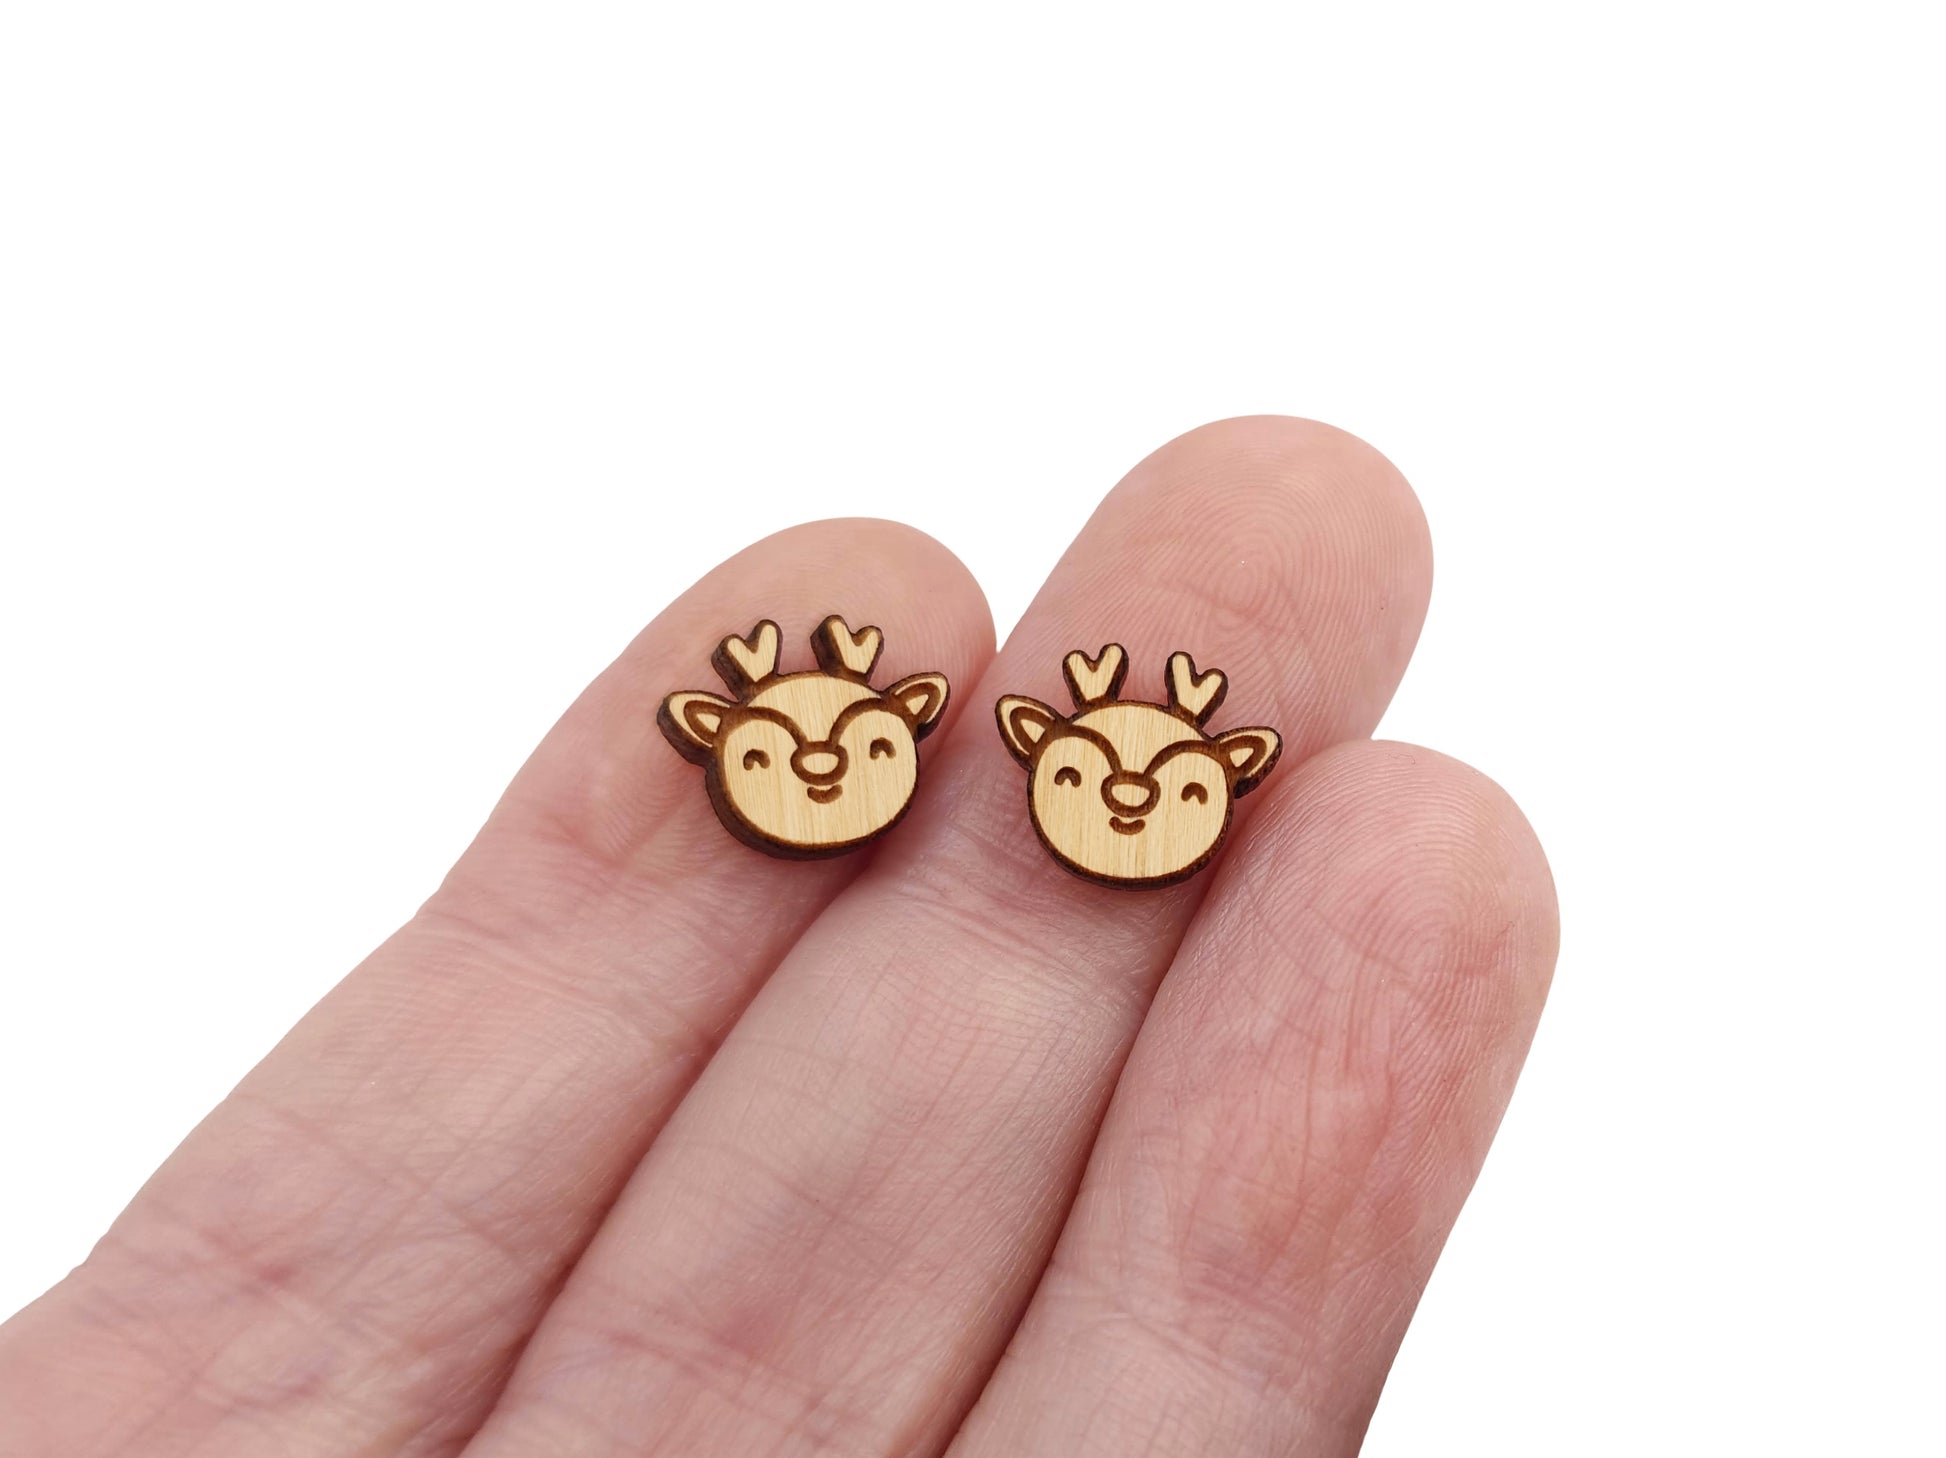 a hand holding a pair of wooden cabochon stud earring blanks cut and engraved to look like a reindeer